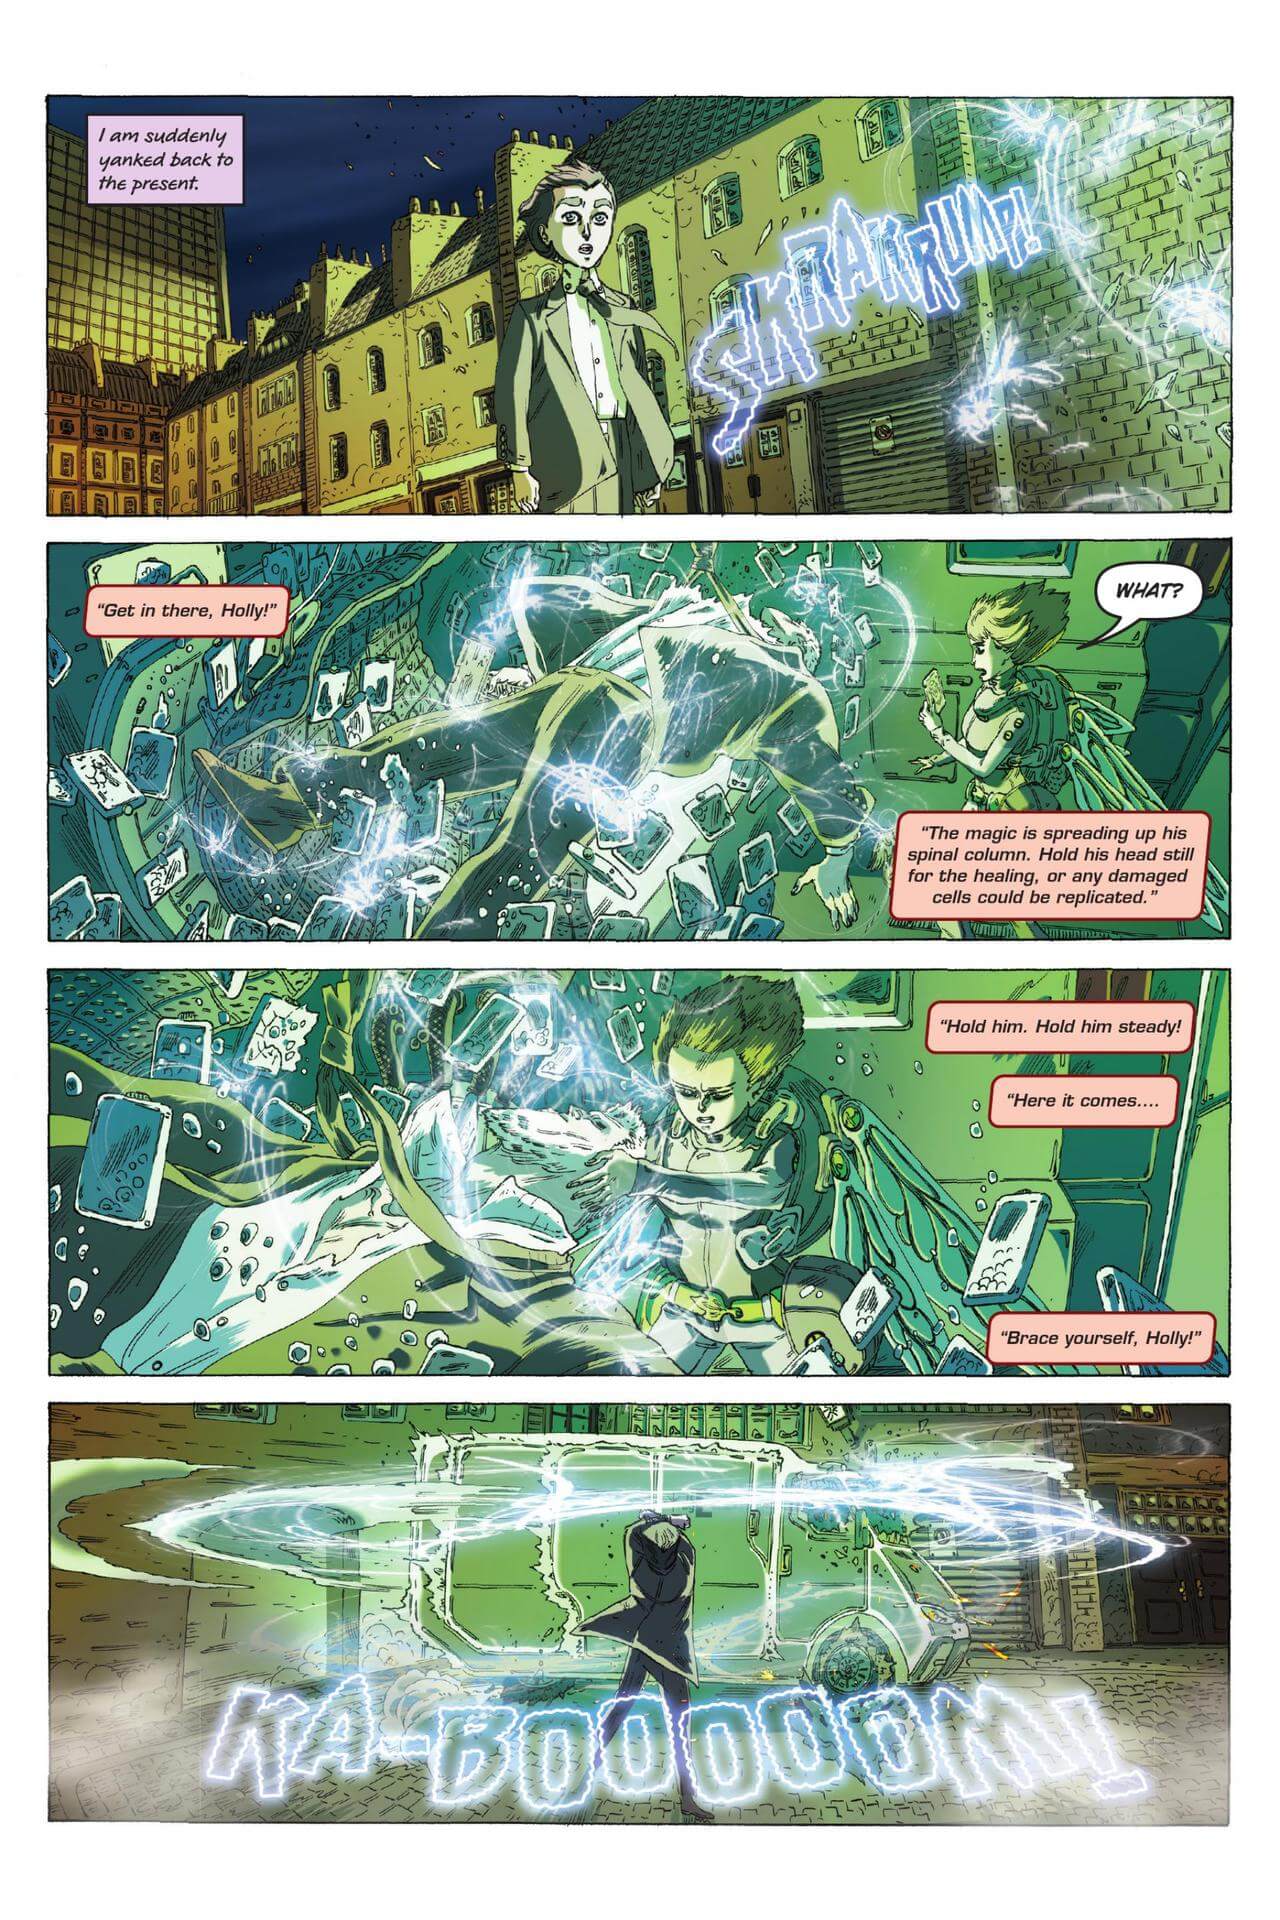 page 38 of artemis fowl eternity code graphic novel